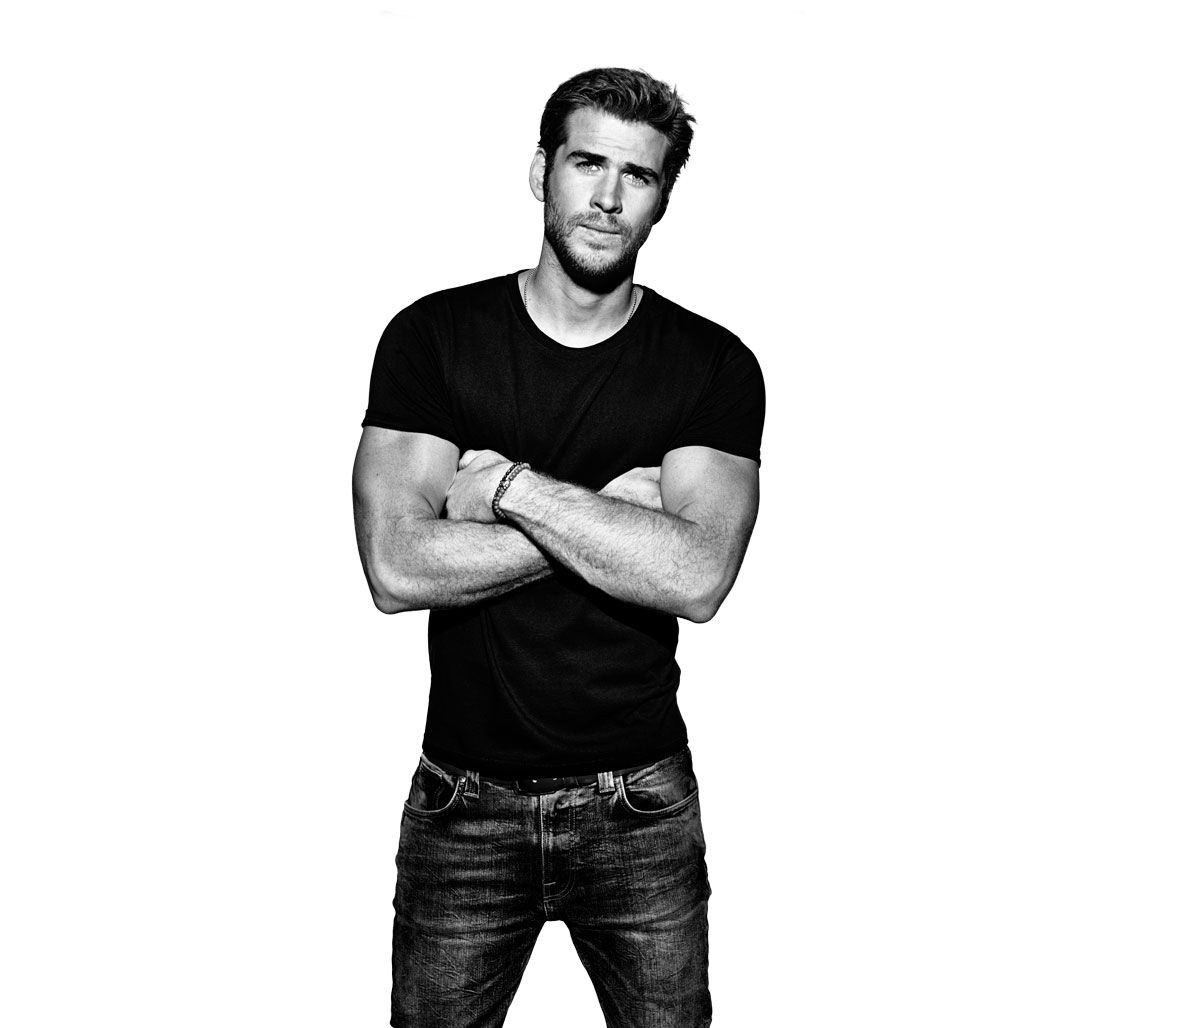 Liam Hemsworth: The actor, surfer, environmentalist, and hardcore  pullup-and-